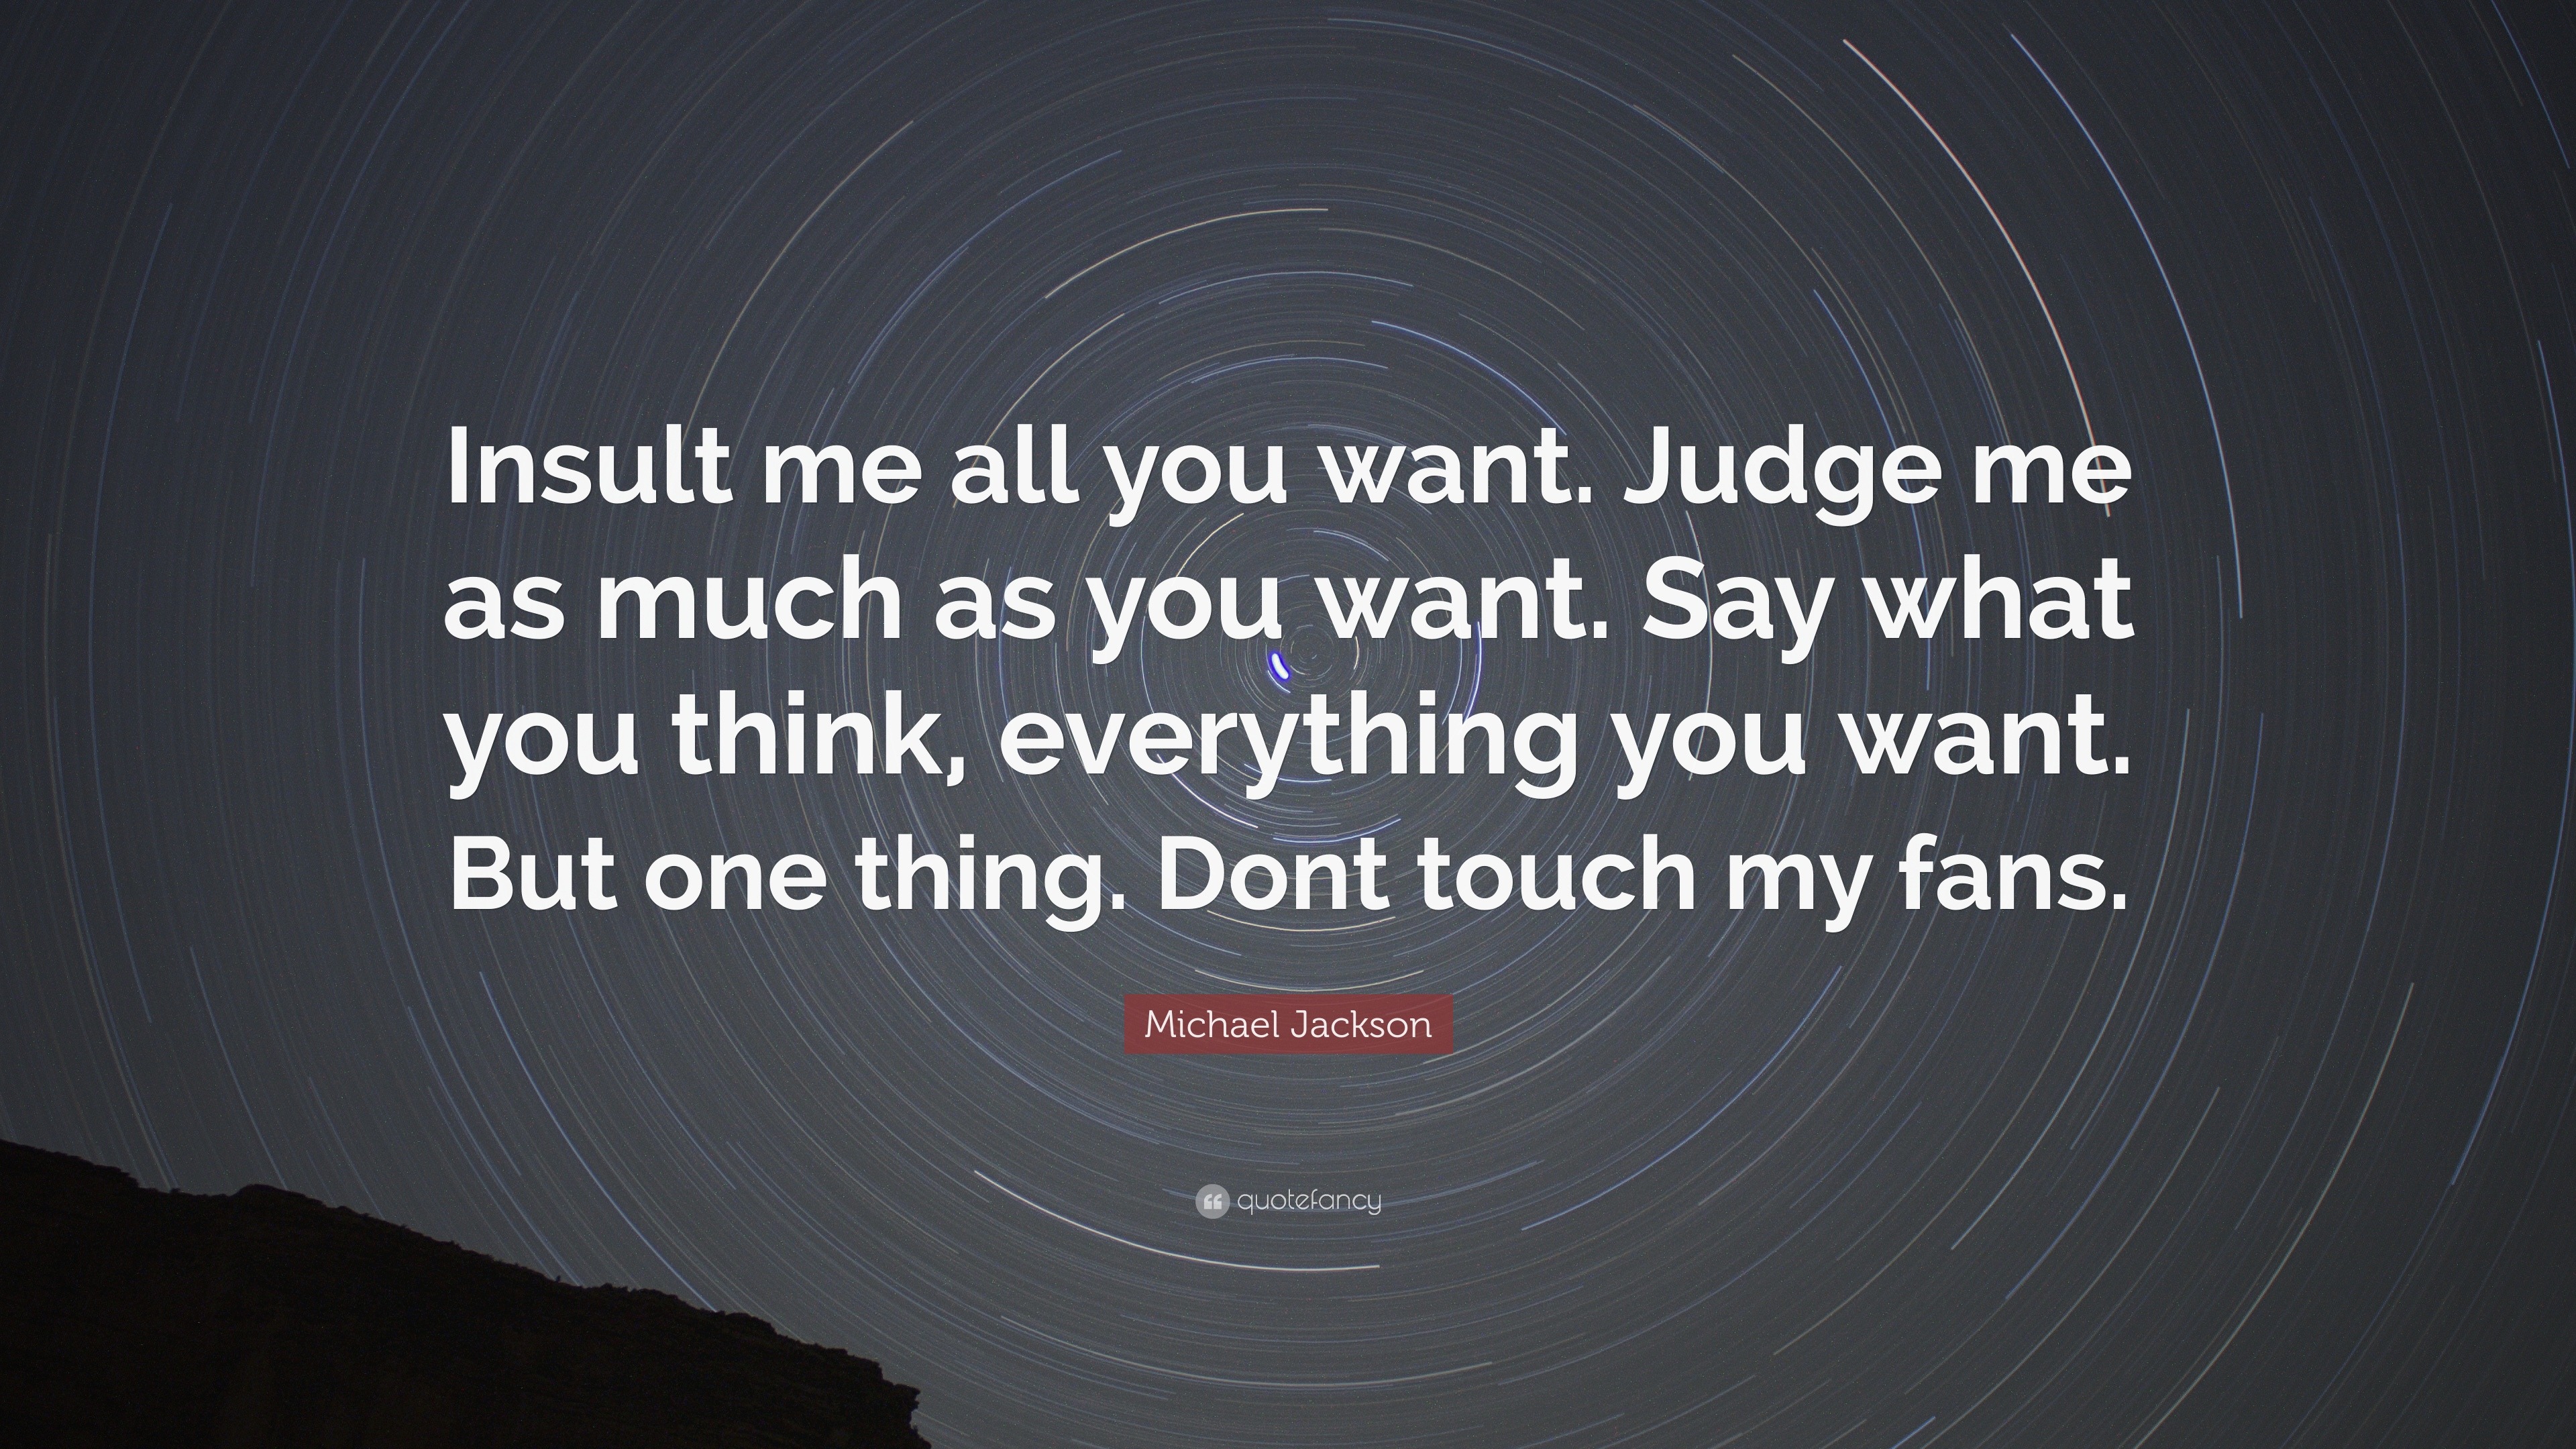 Michael Jackson Quote: “Insult Me All You Want. Judge Me As Much As You Want. Say What You Think, Everything You Want. But One Thing. Dont Touch...”